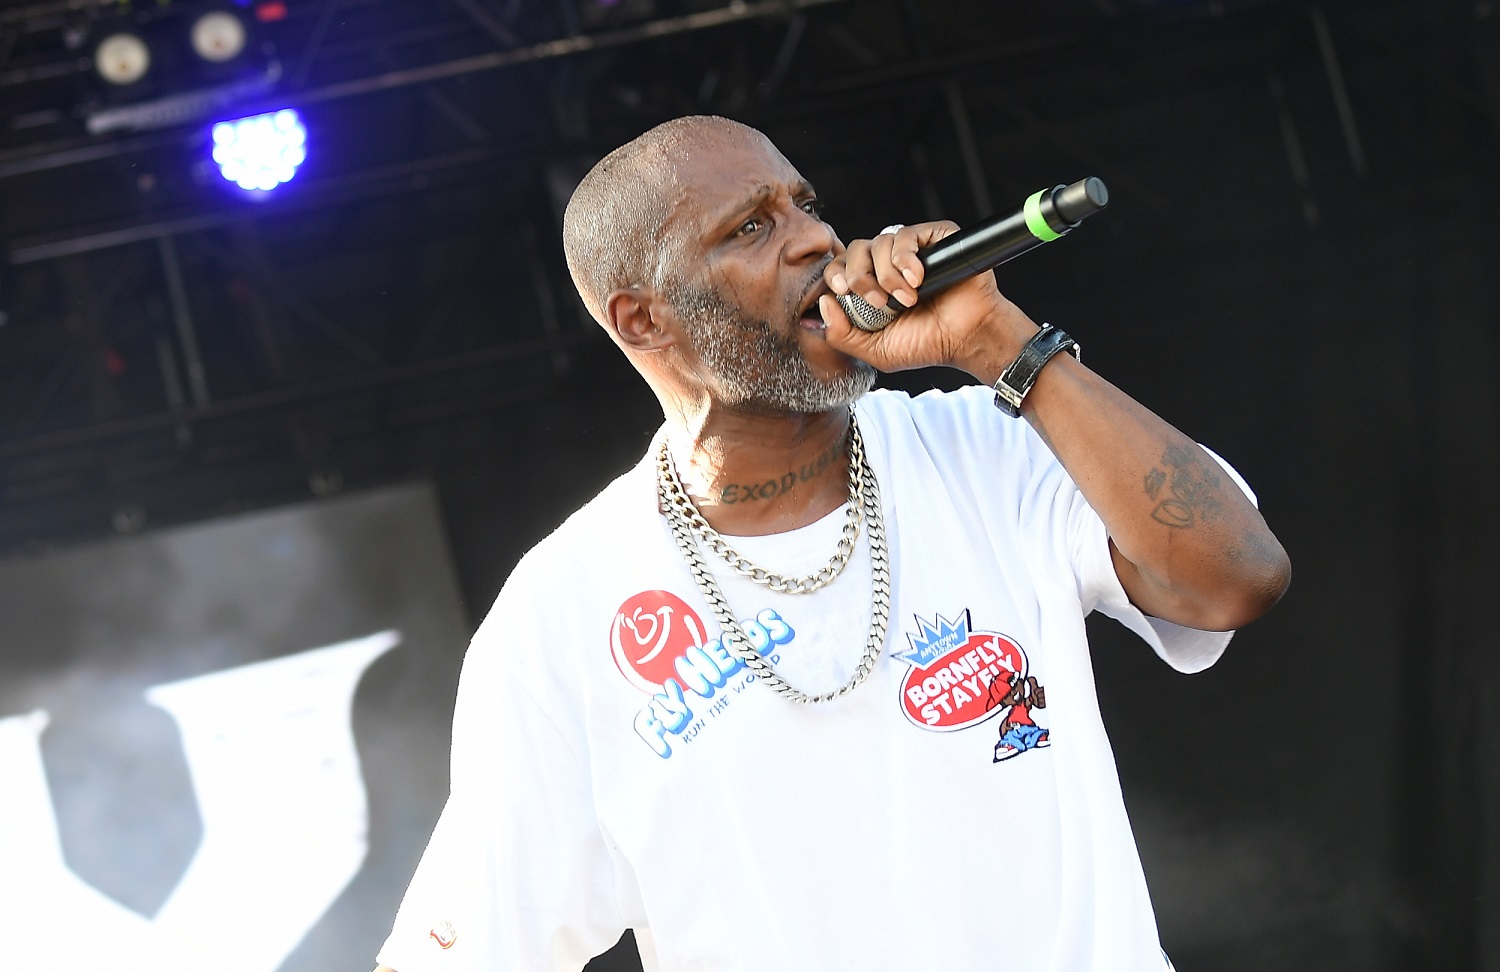 Rapper DMX was an influence on LeBron James' early life